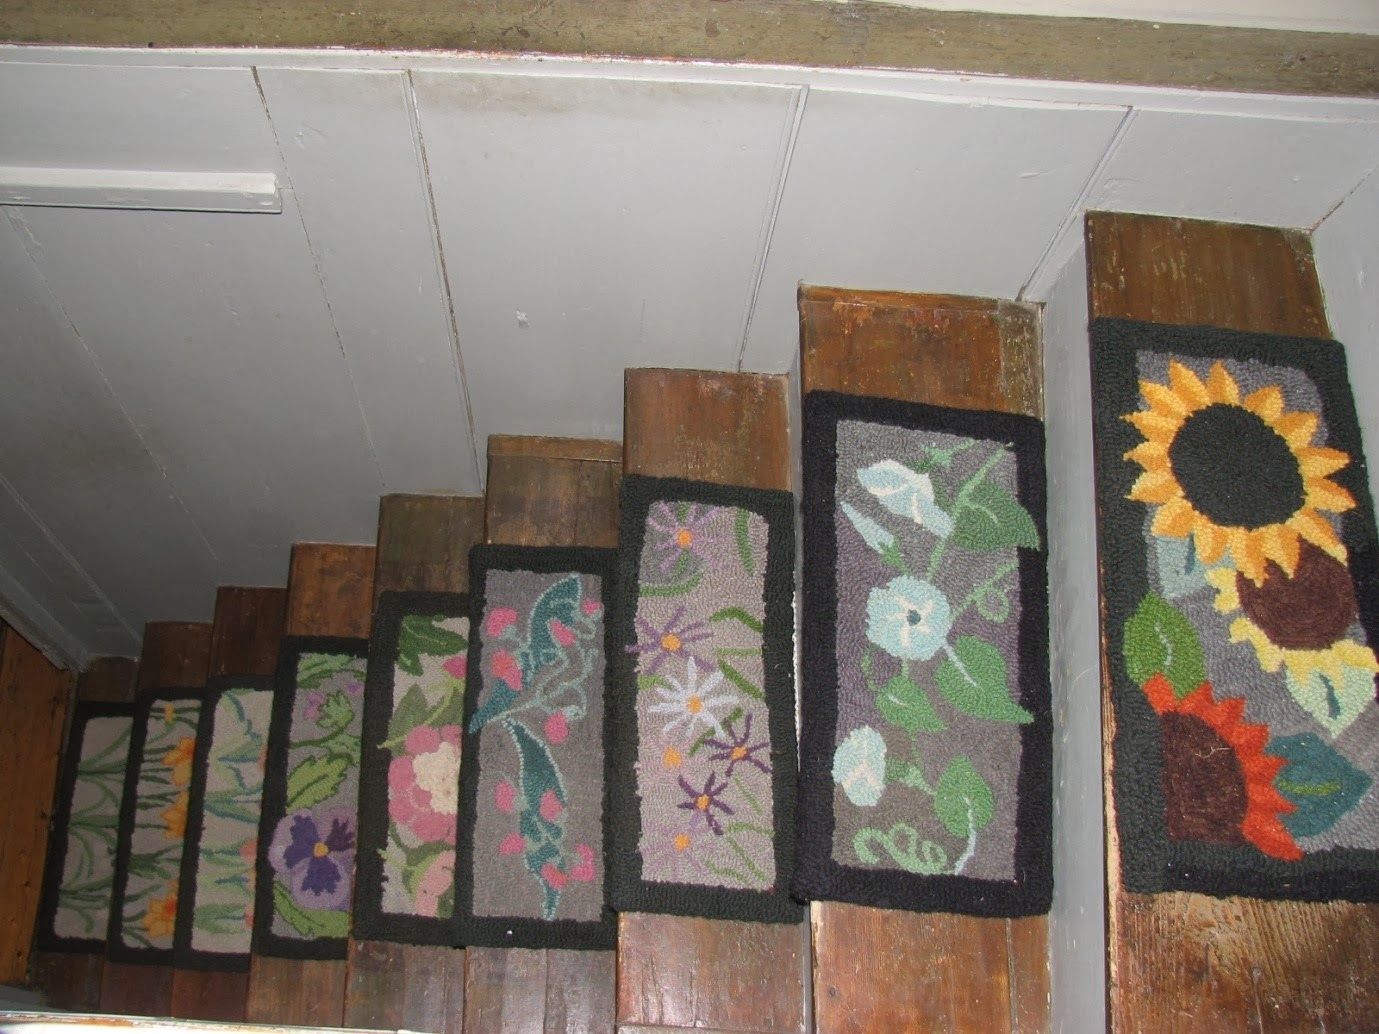 Stair Tread Covers Ideas About Stair Treads On Pinterest Carpet Within Stair Tread Rug Covers (View 15 of 20)